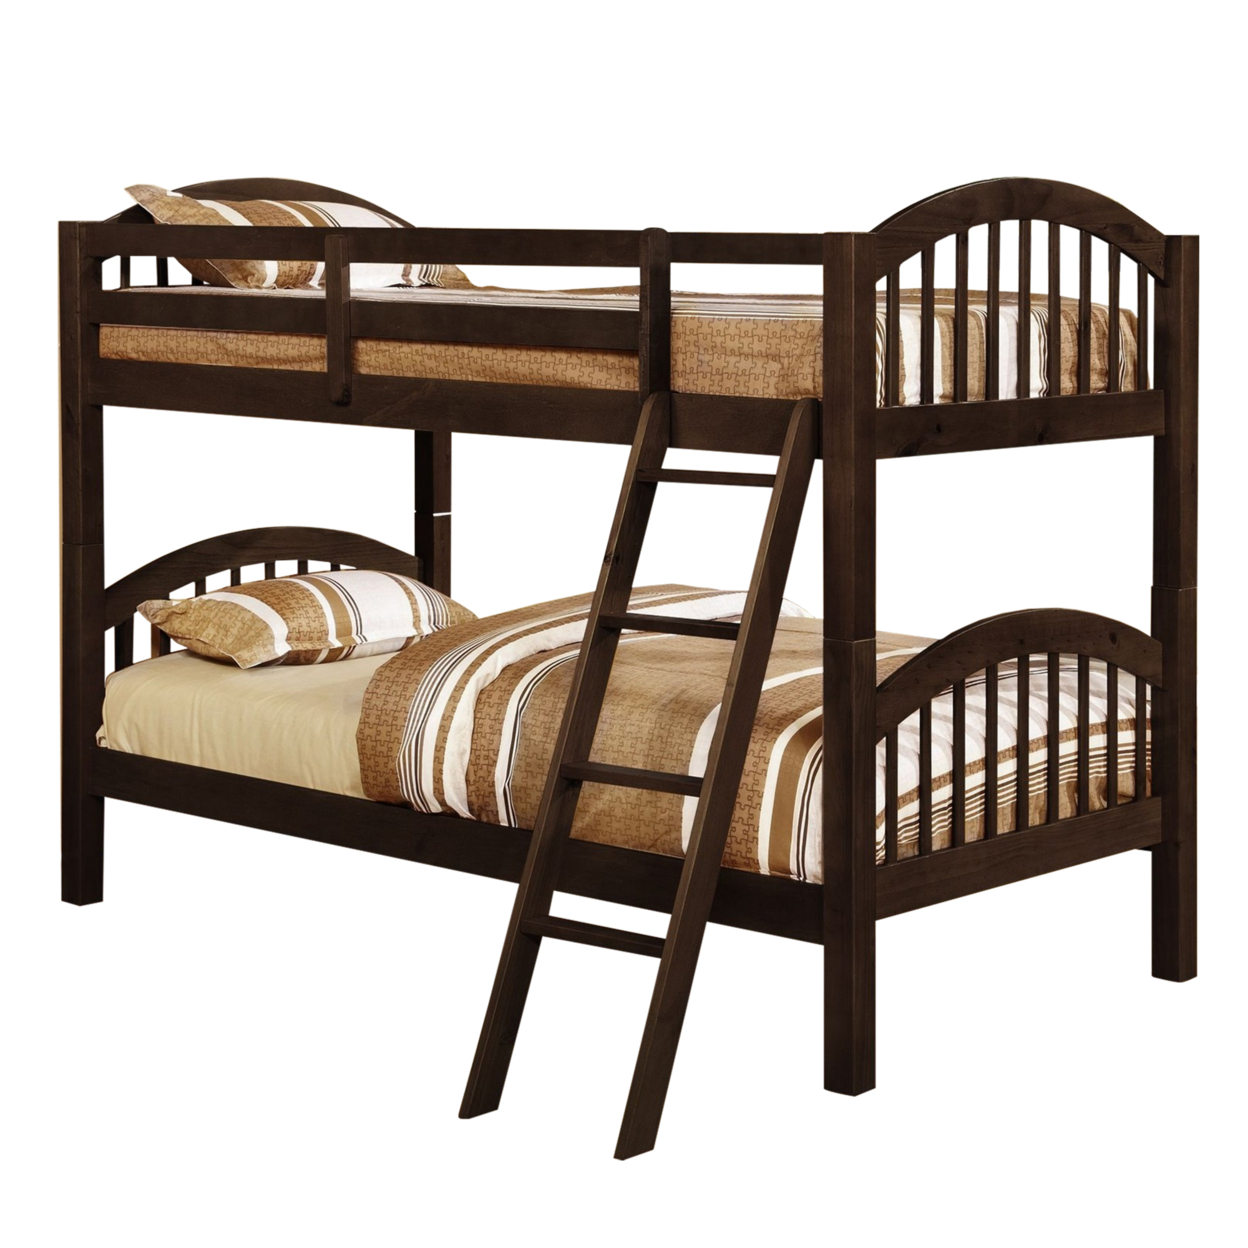 Wooden Twin Over Twin Bunk Bed With Slatted Arched Headboard, Dark Brown- Saltoro Sherpi